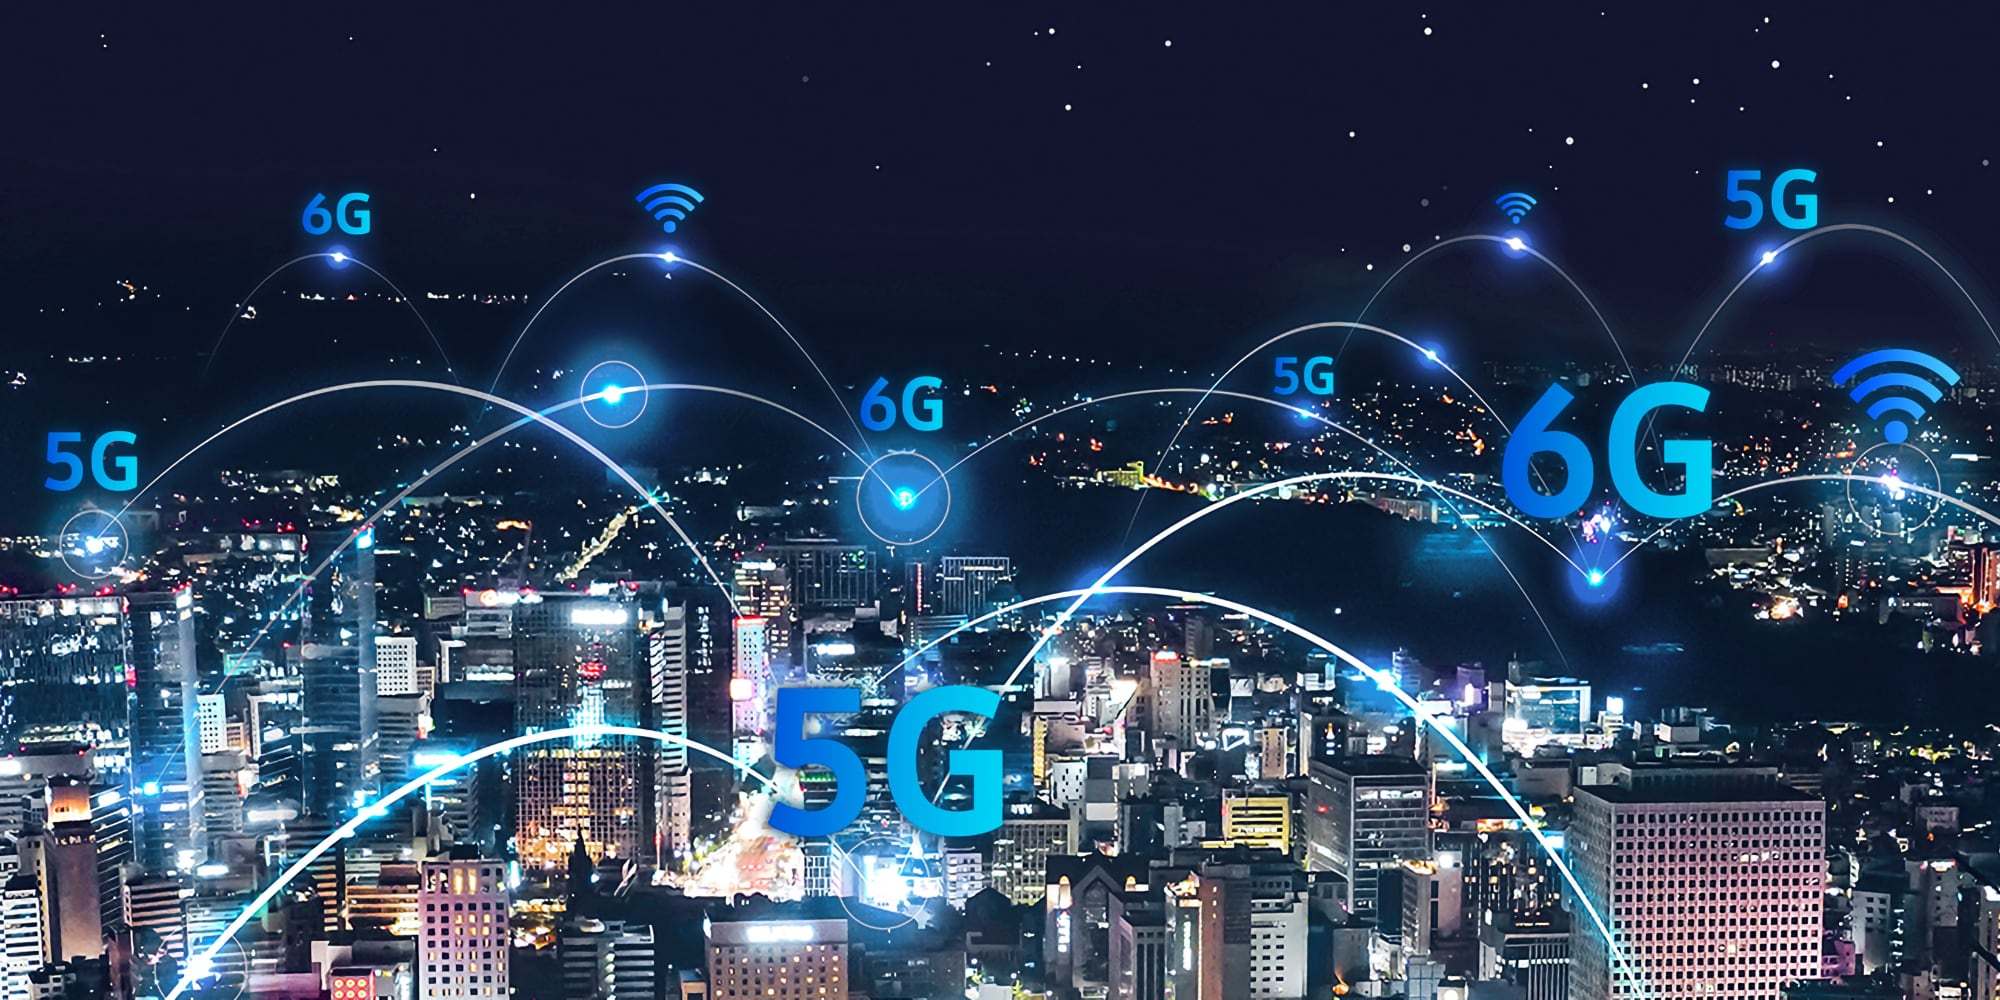 5g 6g samsung 2 Samsung Already Talking Up 6G As Huawei Gets Booted Out Of 5G Networks